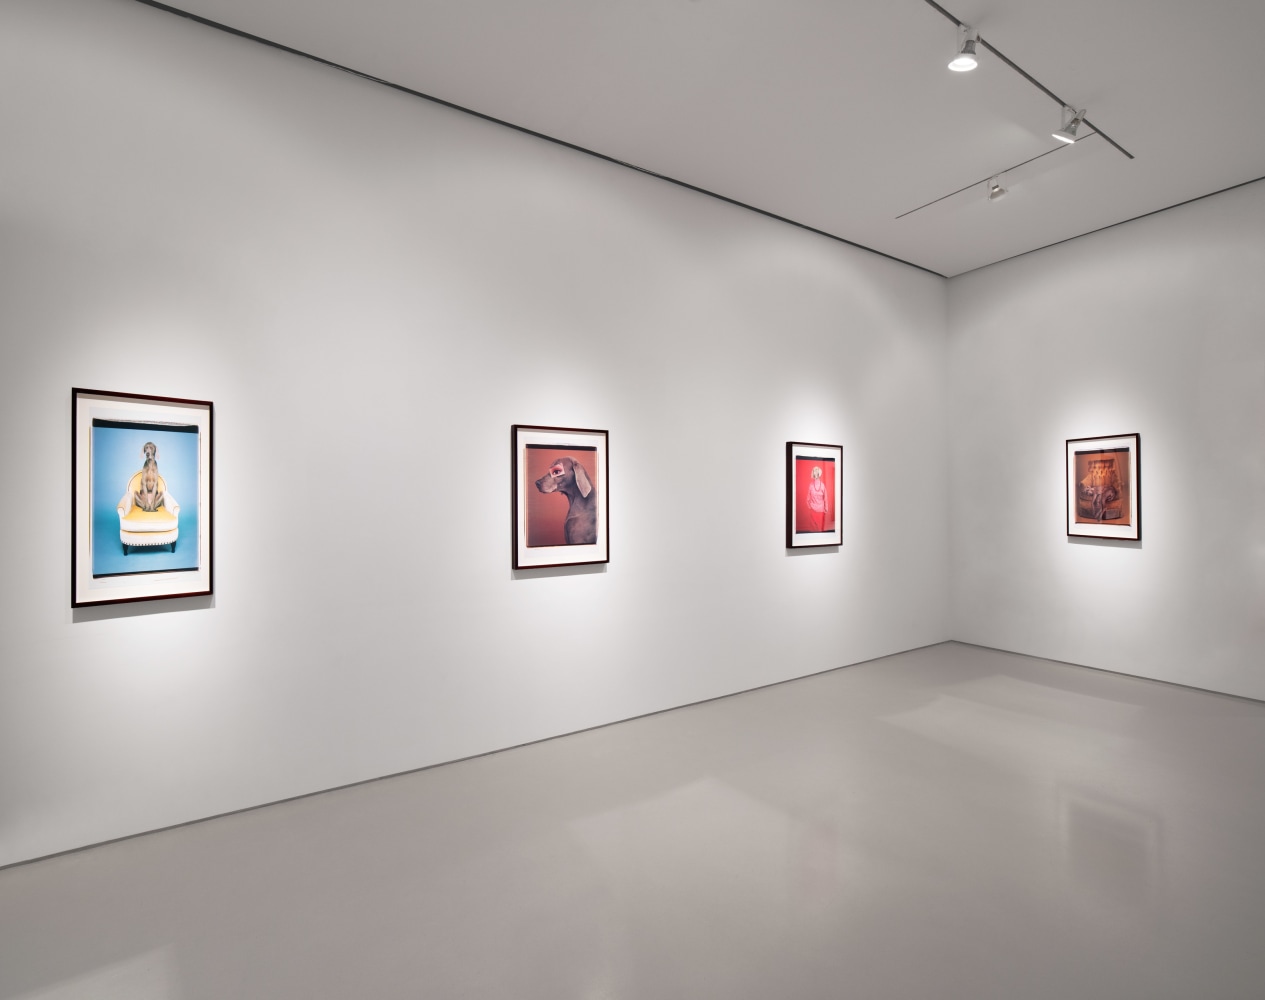 Three colorful vertical photographs hung adjacent on one wall featured at an angle, and one photograph on perpendicular wall